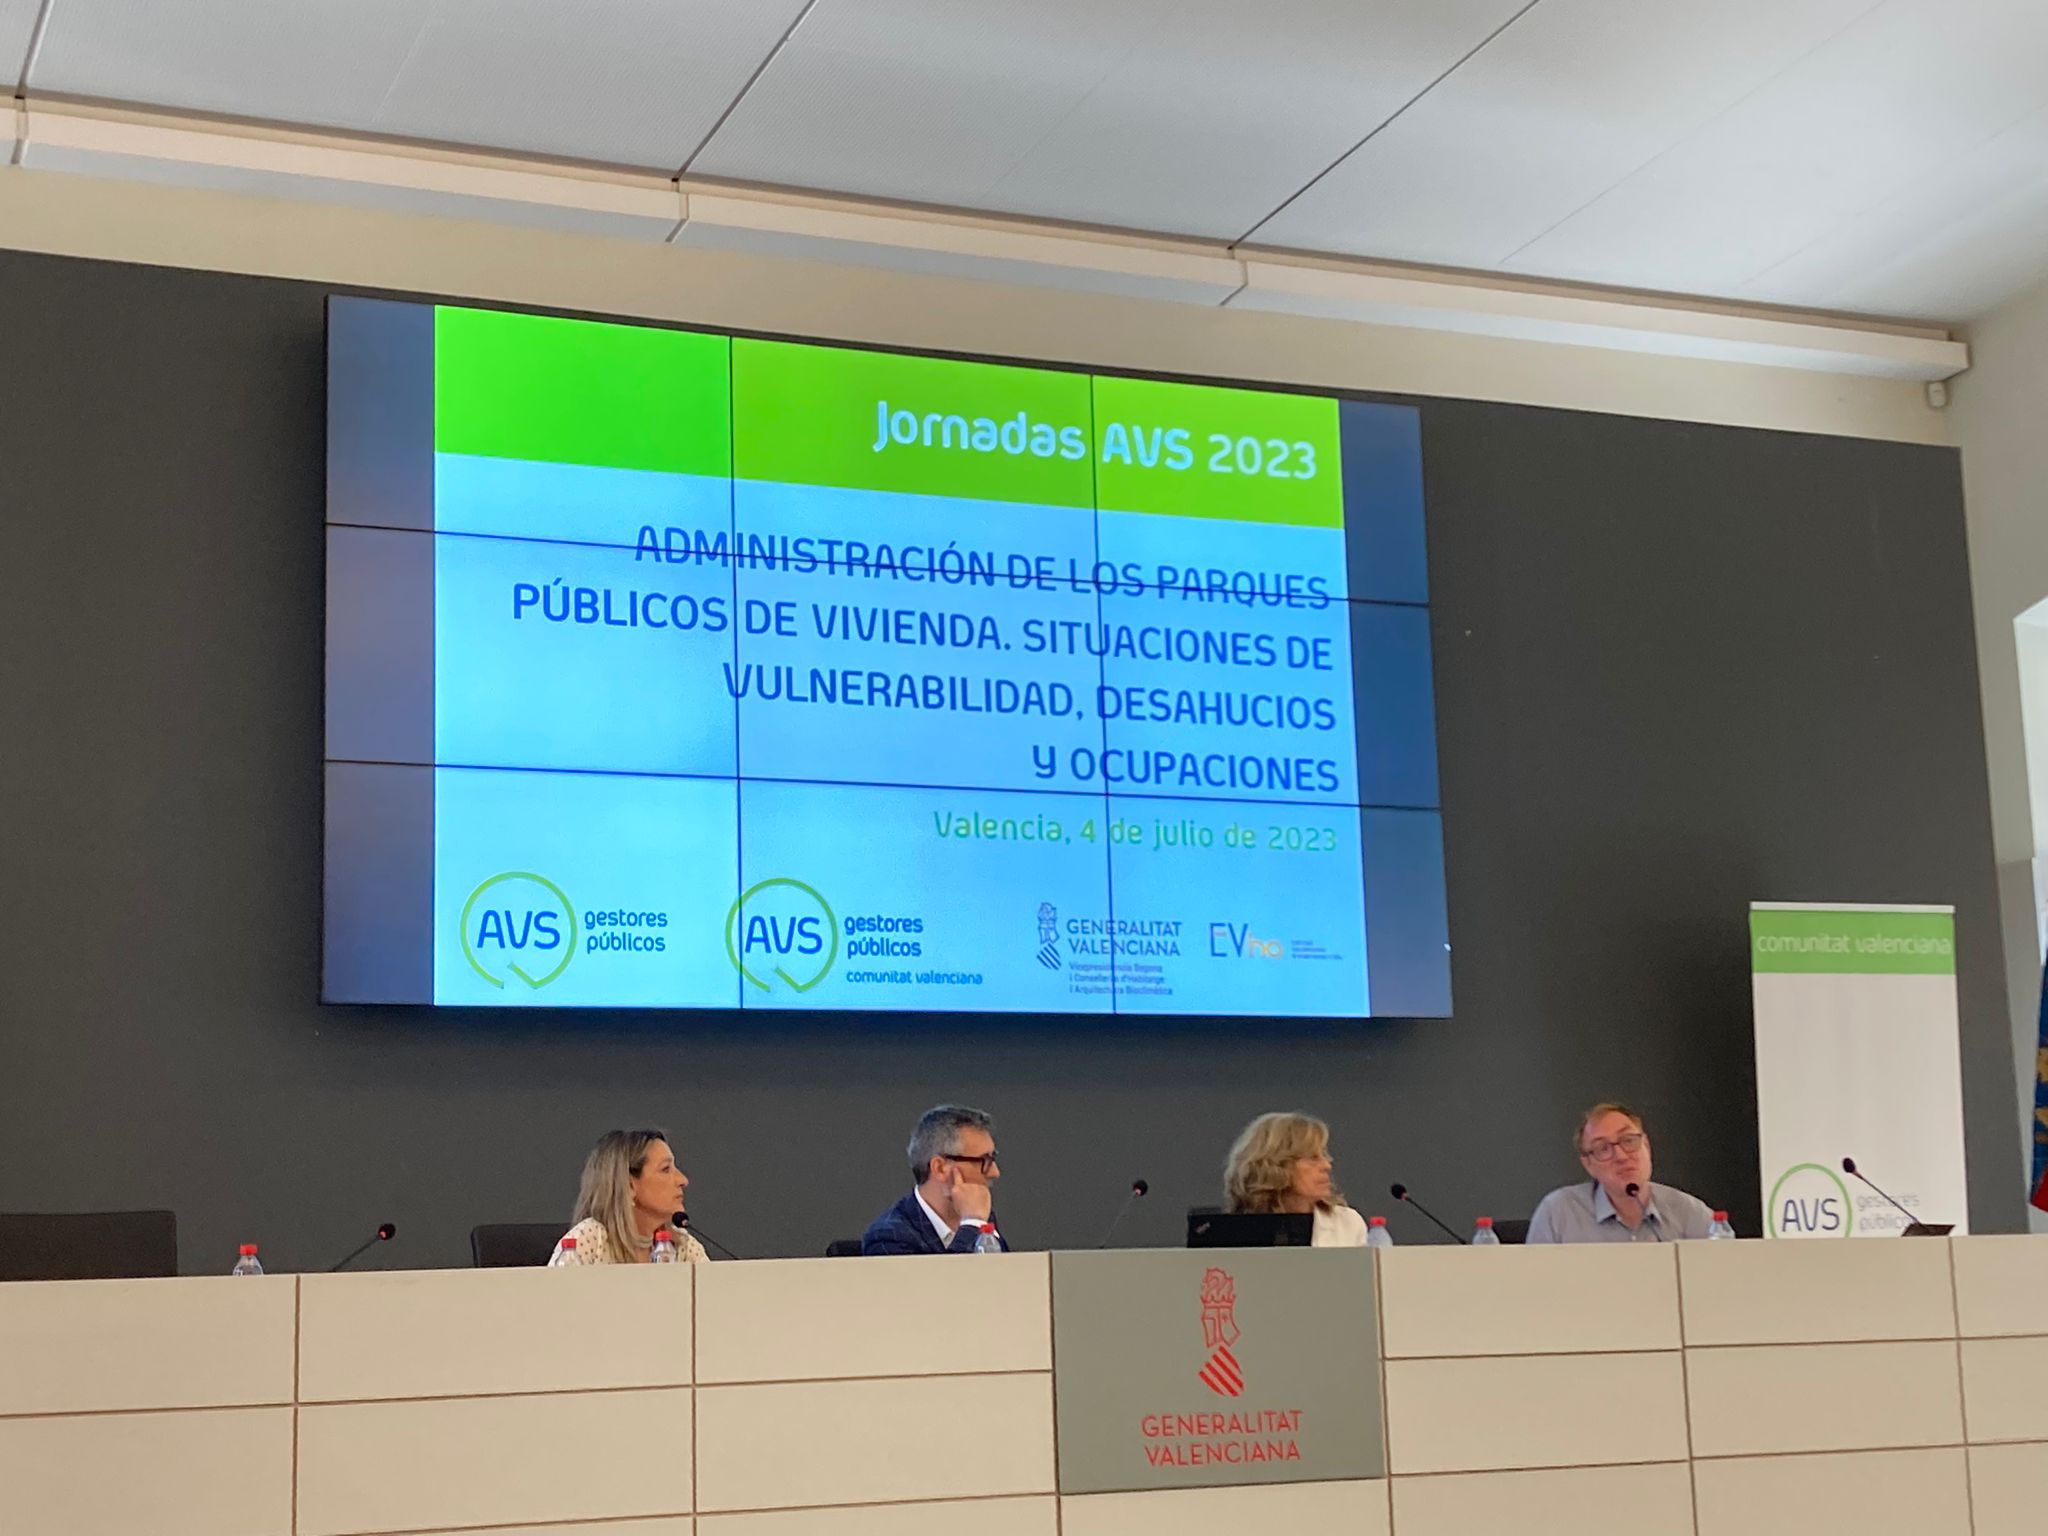 Sogeviso participates in the AVS conference on management of public housing stocks from the perspective of the implementation of the Law on the Right to Housing